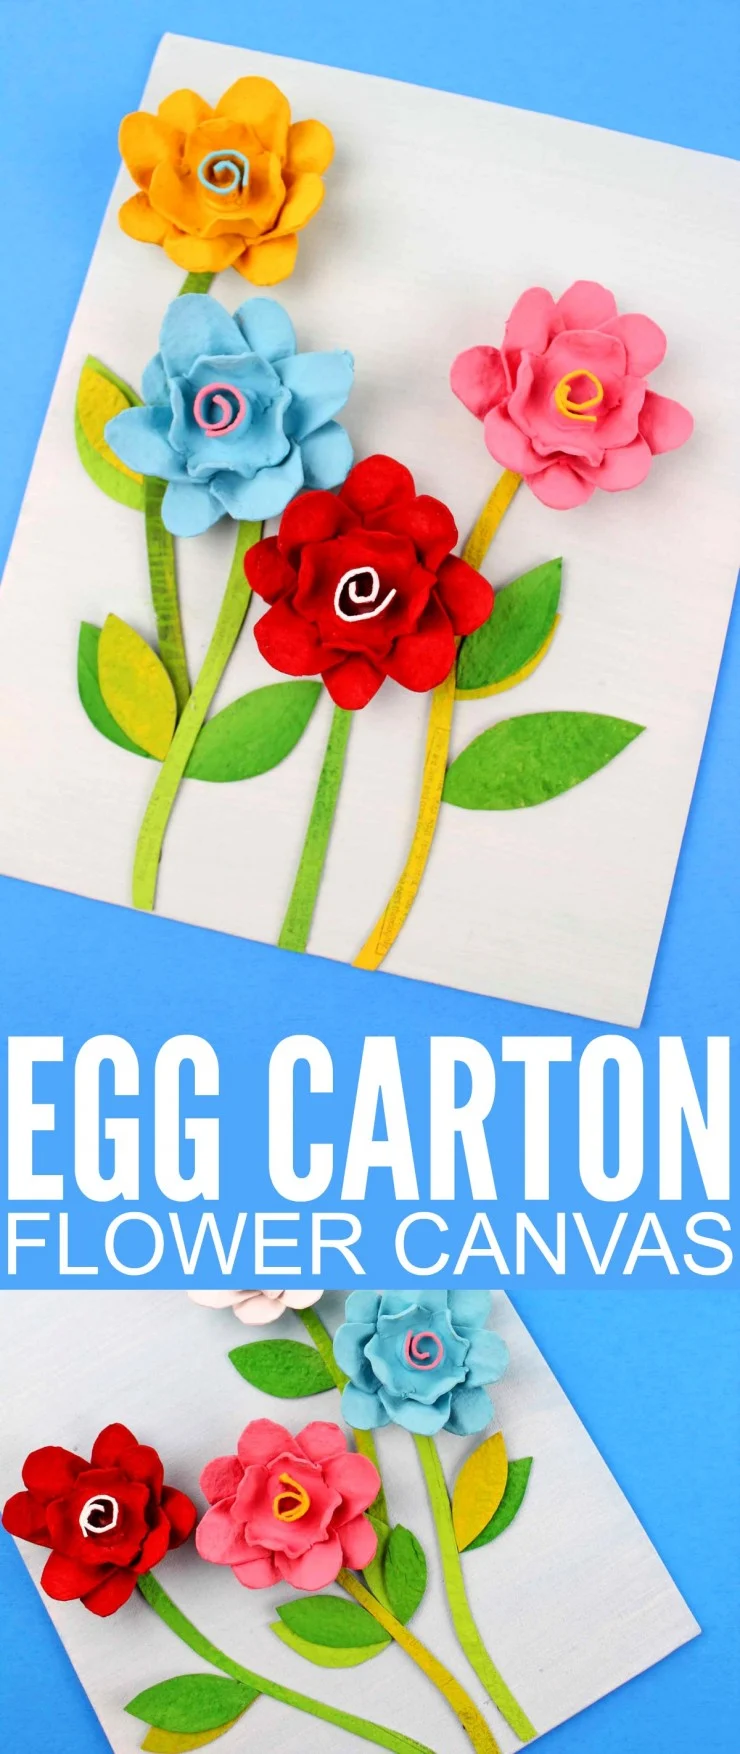 This Egg Carton Flower Canvas is a fun craft for kids that they can gift to mom for mother's day! It is easy to make and allows kids to get really creative with recycled materials!